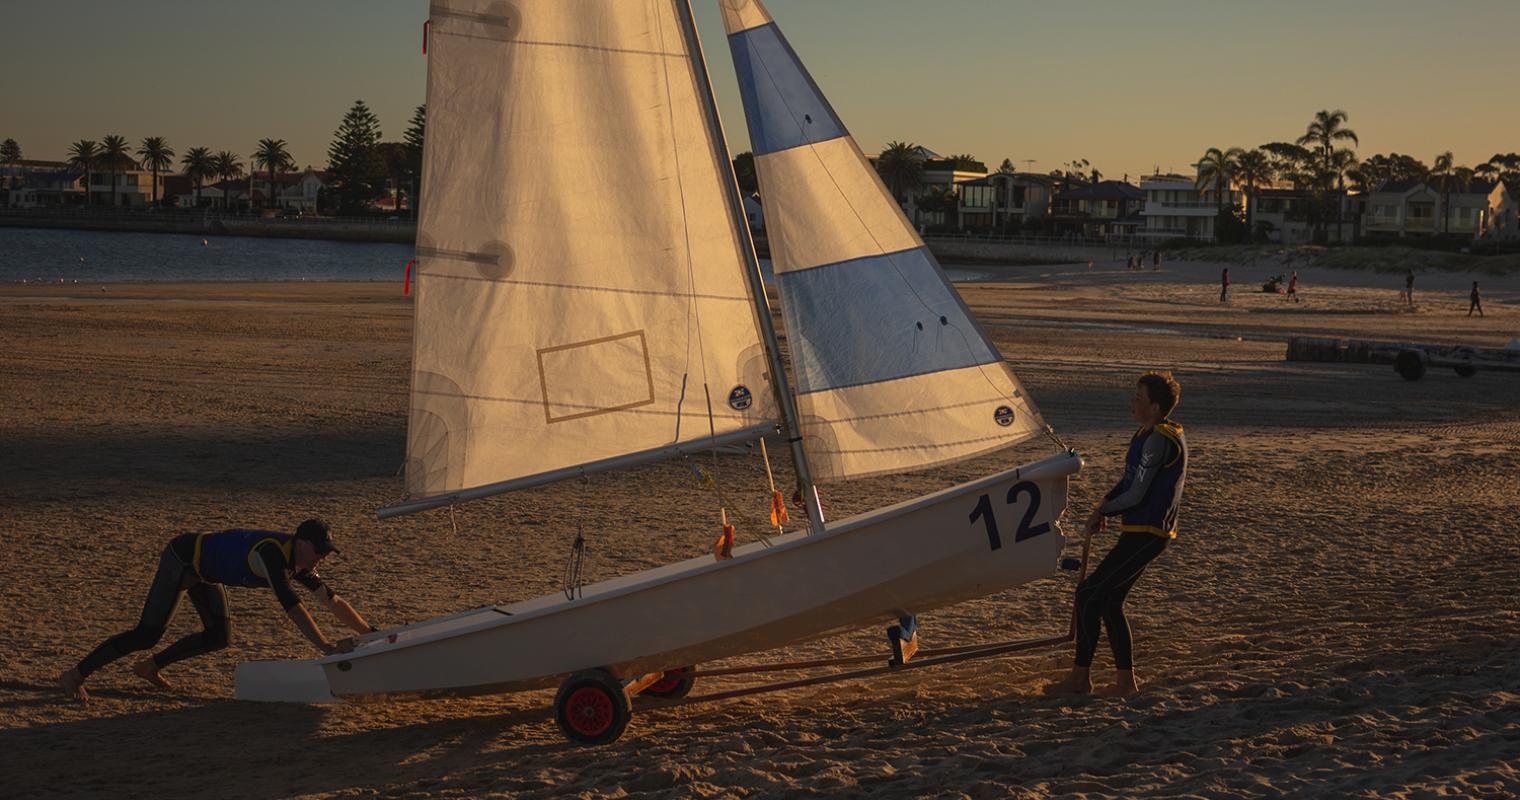 image of sail boat being dragged onto beach